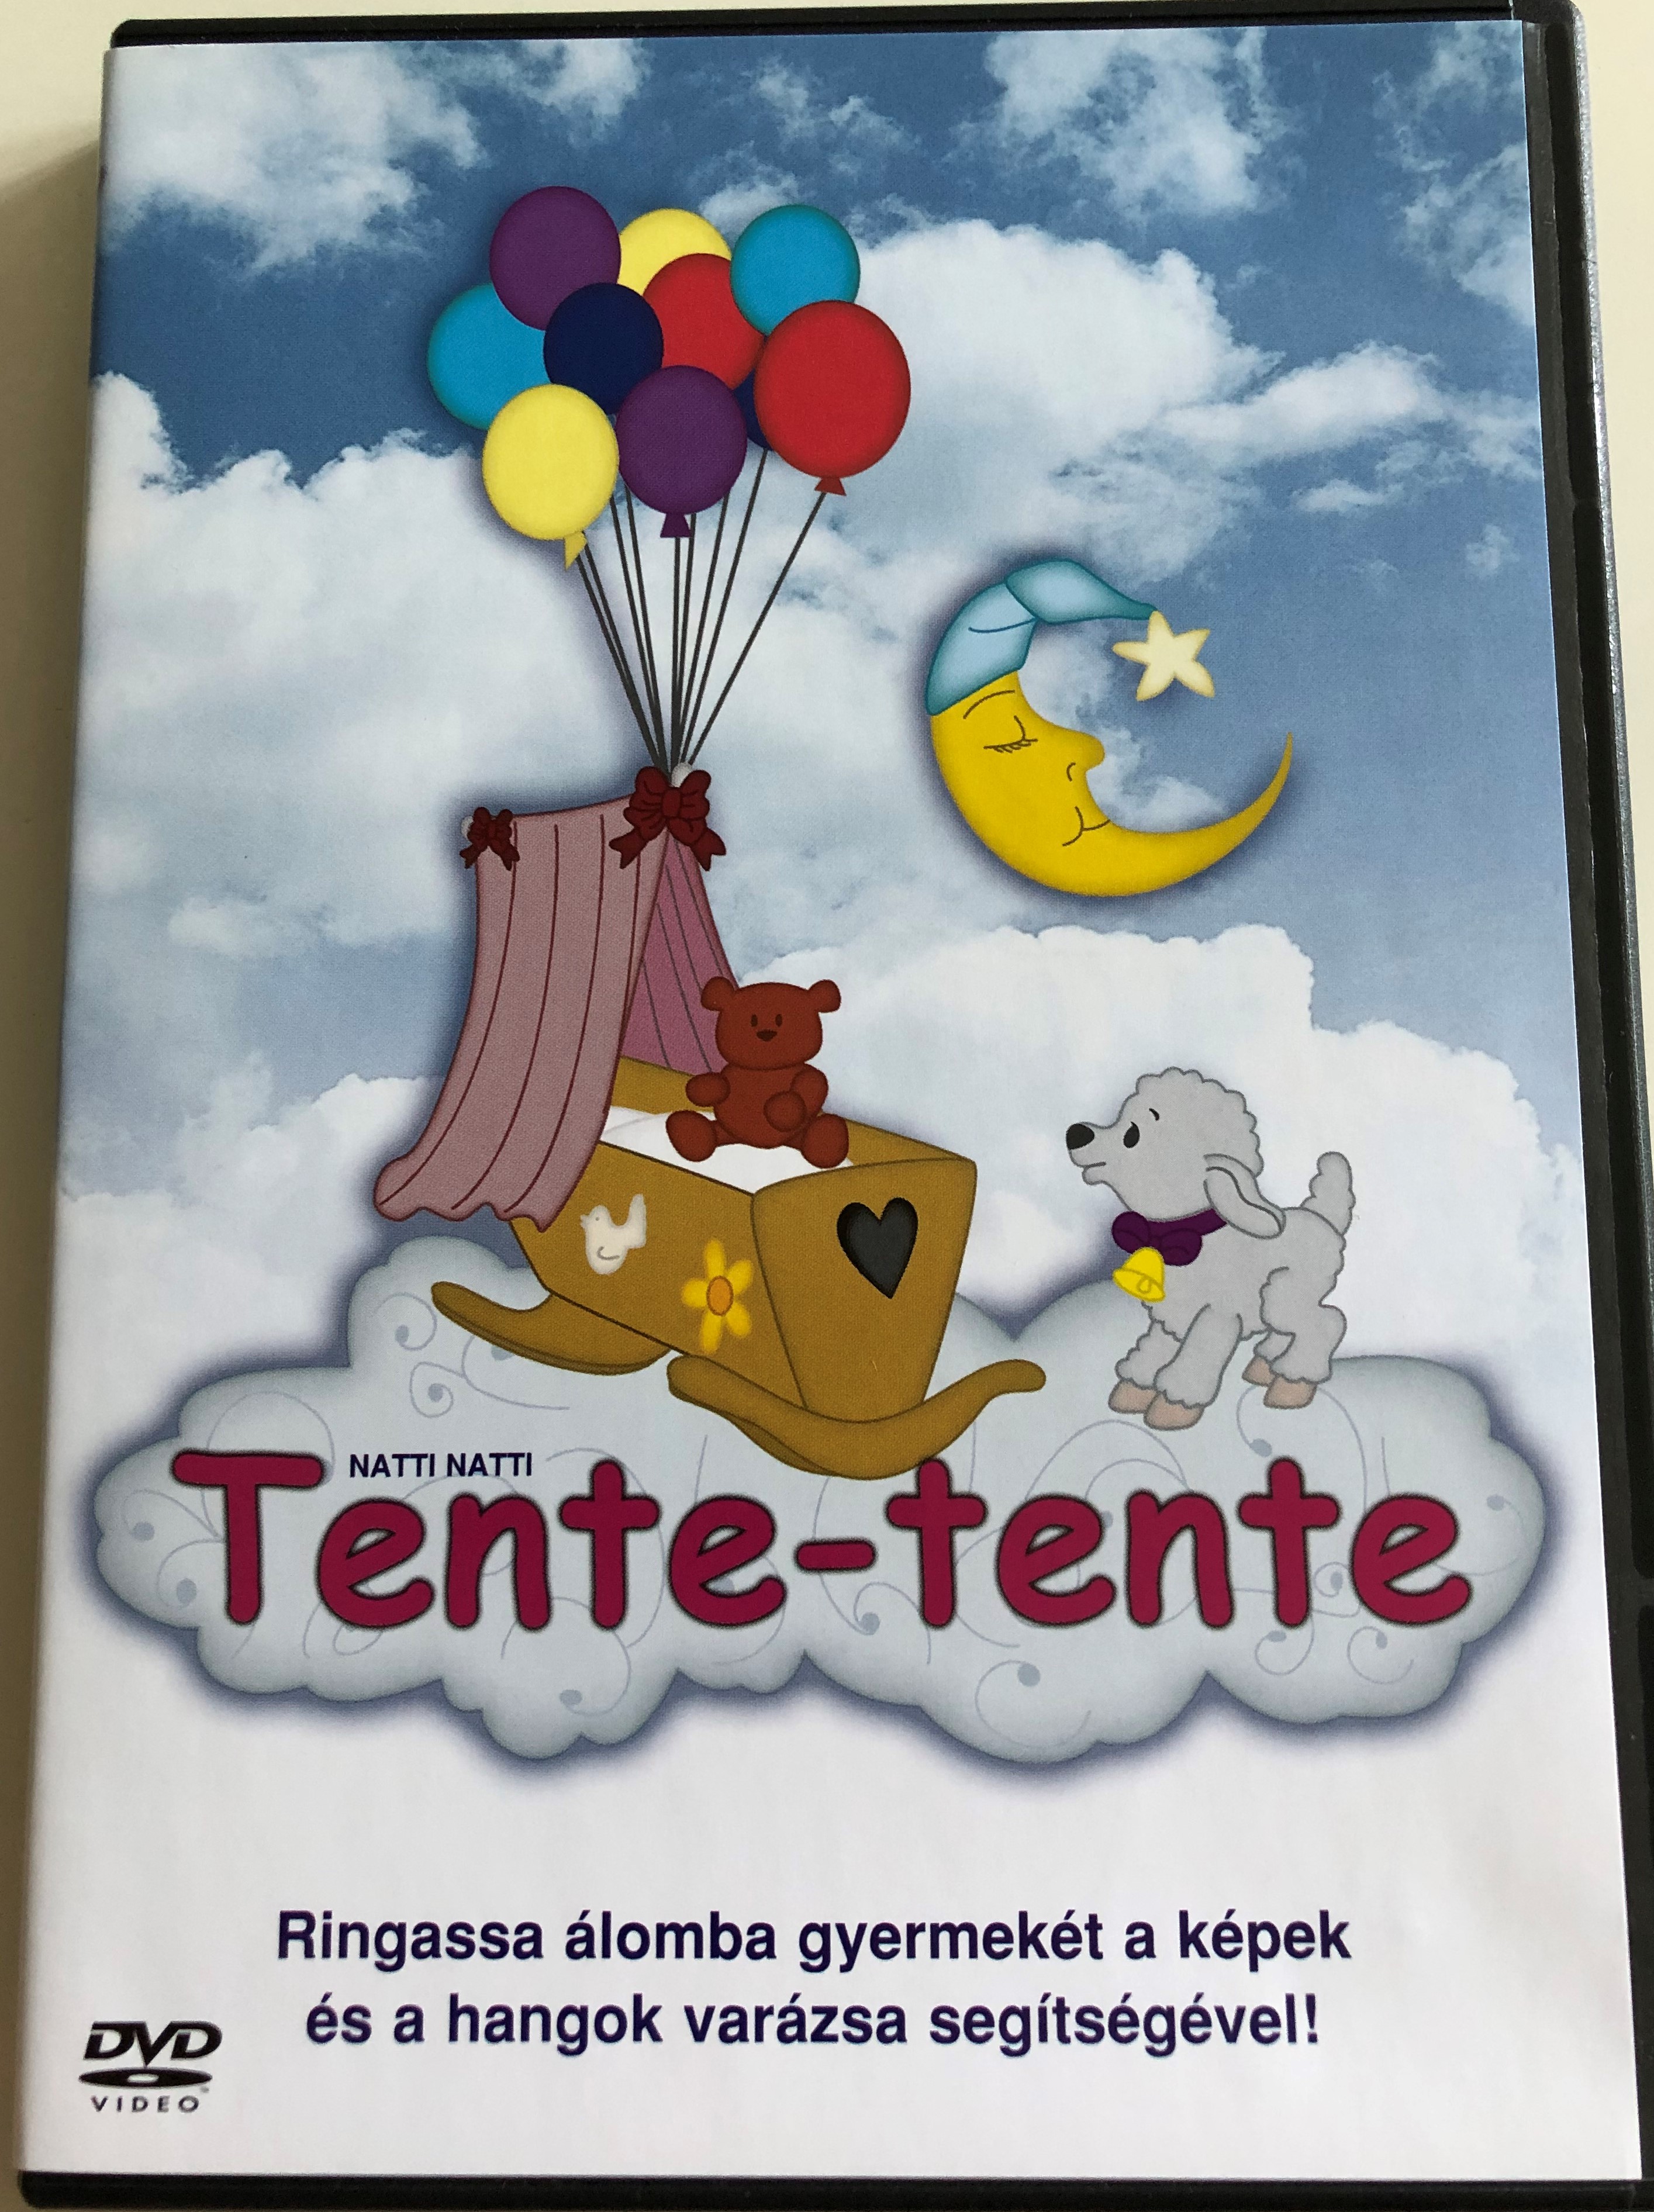 natti-natti-tente-tente-dvd-2003-ringassa-lomba-gyermek-t-a-k-pek-s-a-hangok-var-zsa-seg-ts-g-vel-animal-themed-video-lullaby-for-your-toddlers-with-classical-ambient-and-modern-music-1-.jpg